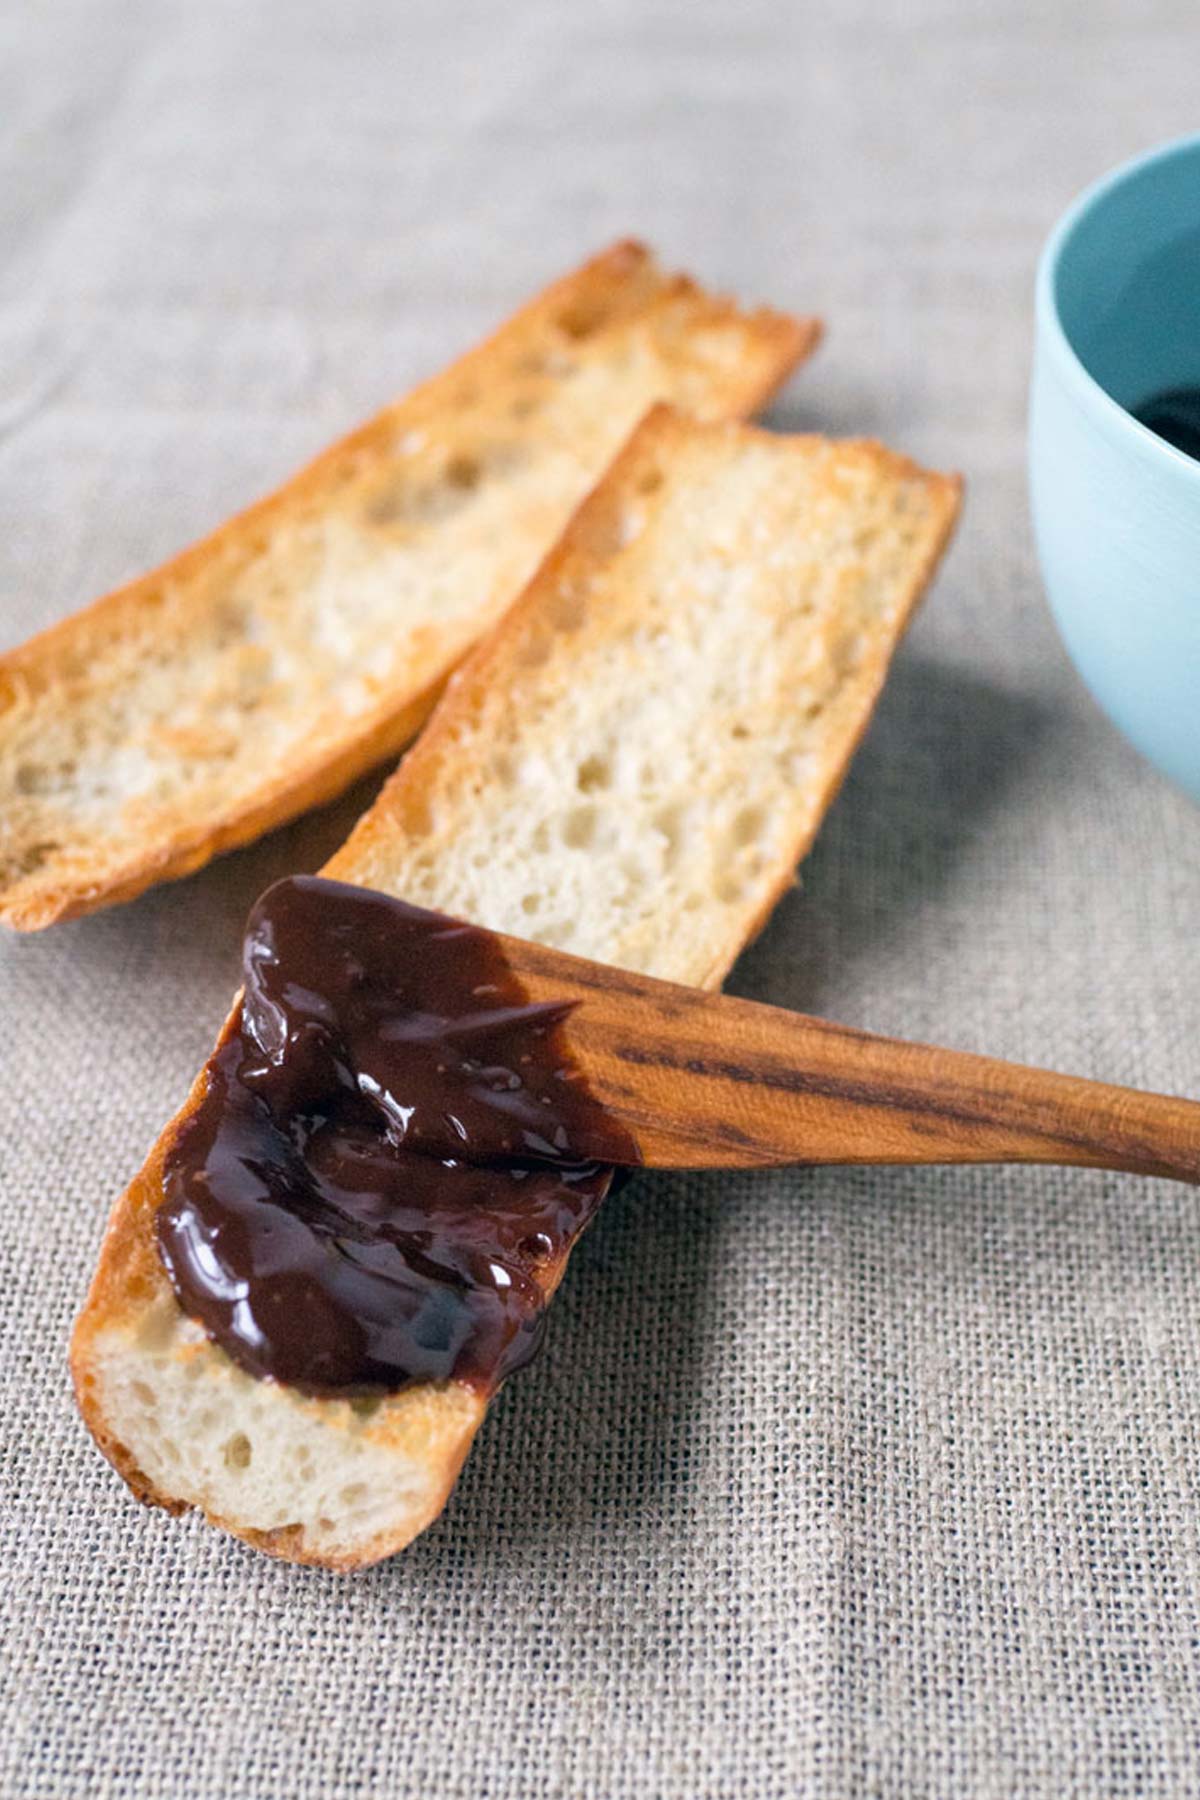 Earl Grey Chocolate Spread on a toasted baguette.